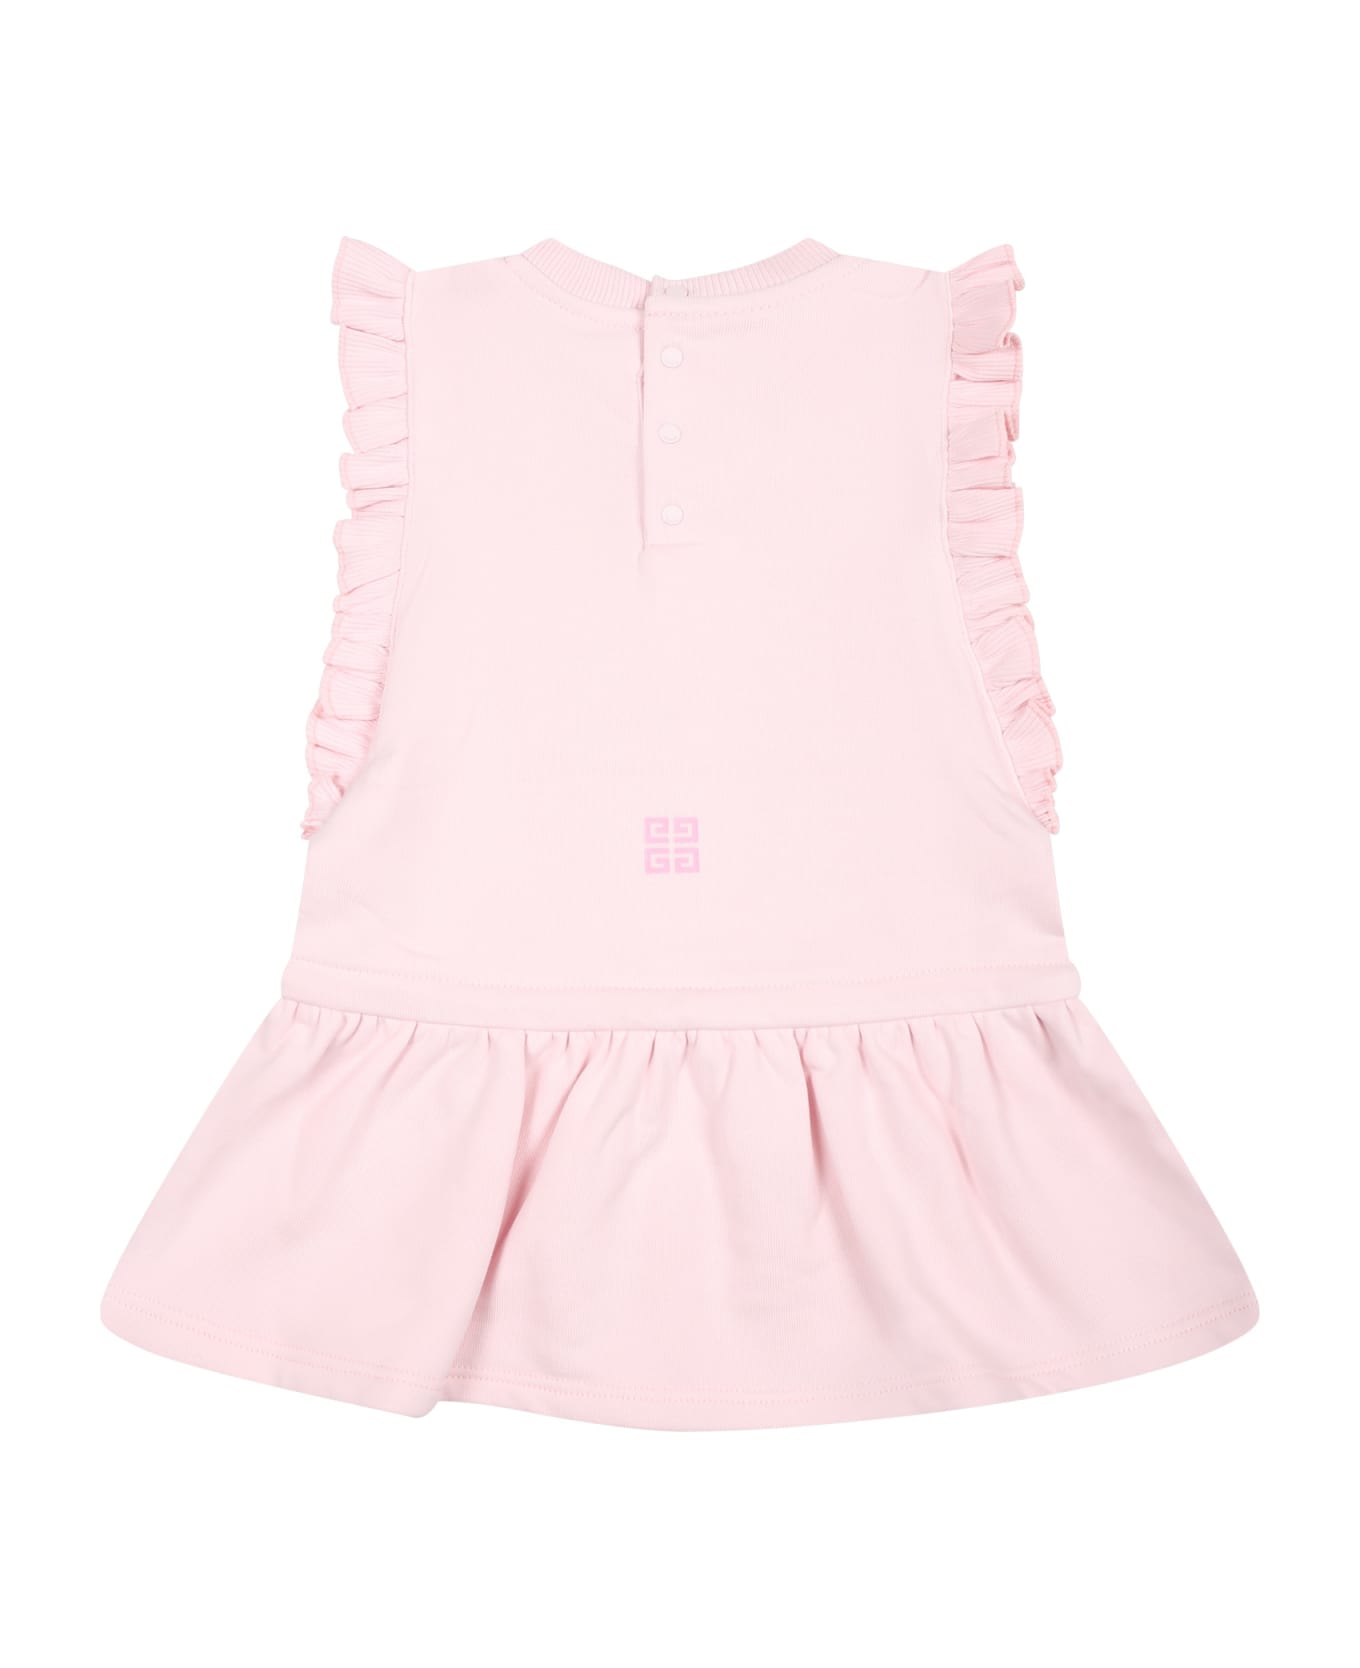 Givenchy Pink Dress For Baby Girl With Logo - Pink